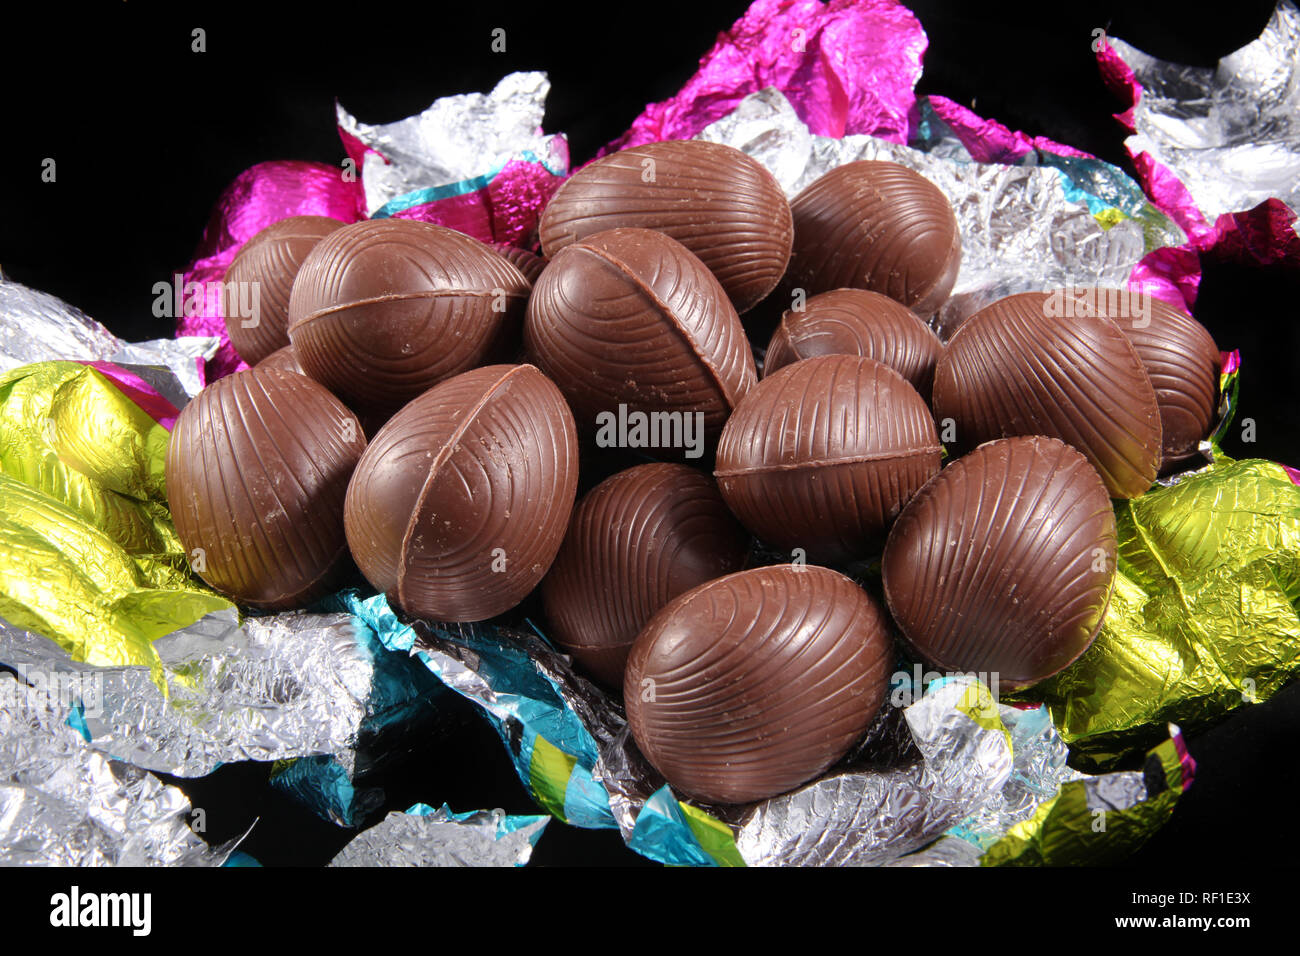 Pile of unwrapped chocolate easter eggs with the colorful foil wrapping surrounding it on a black background. Stock Photo